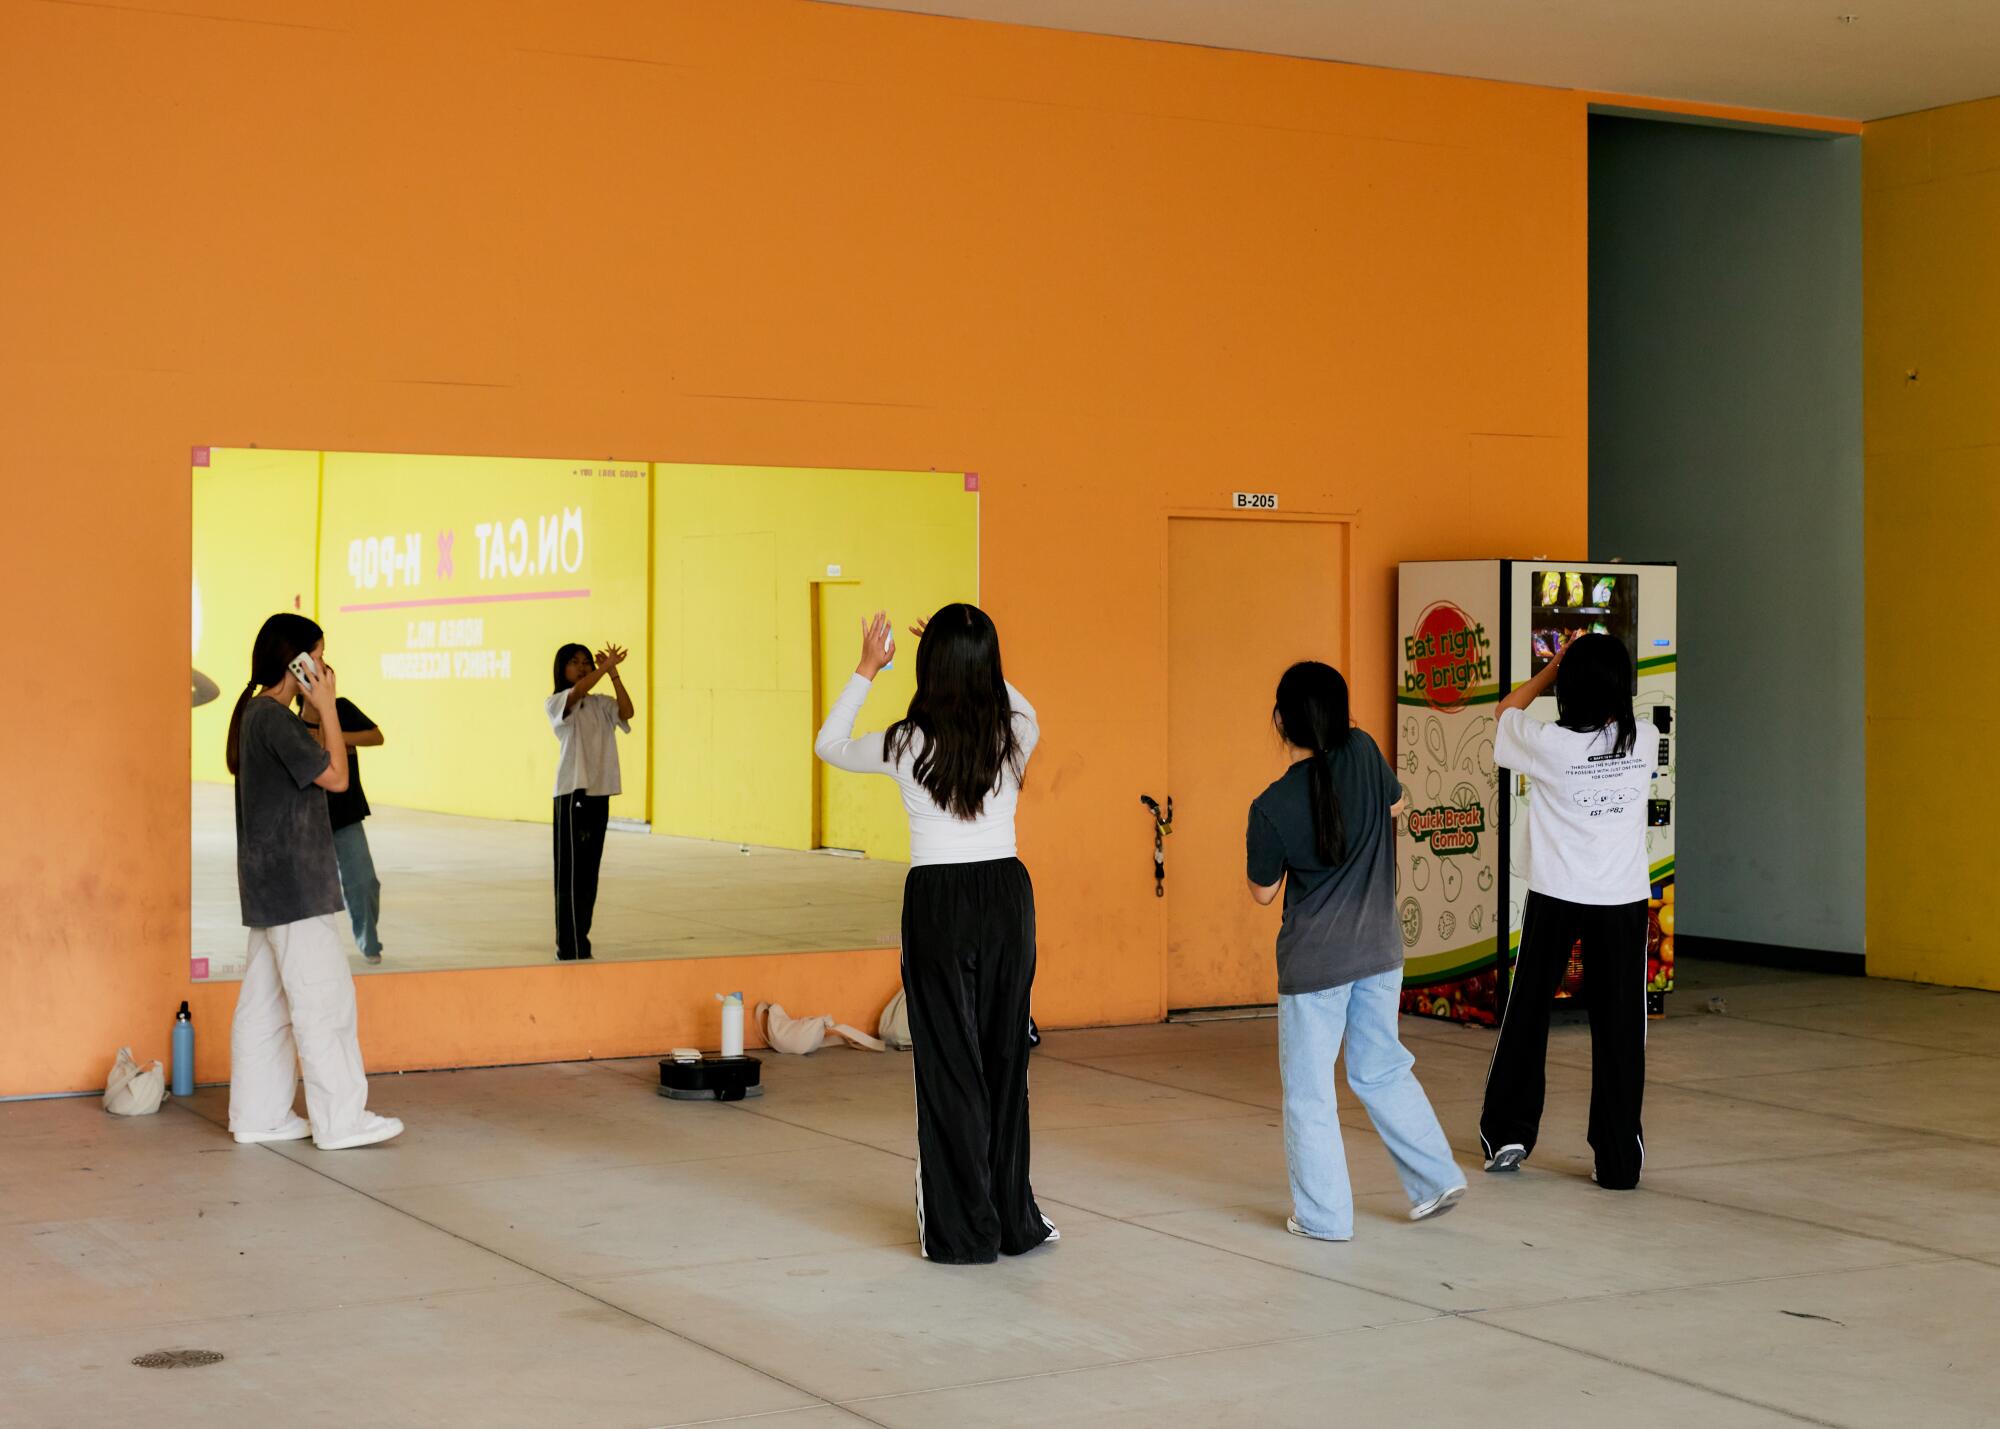 A group of young people standing in front of a mirror at a mall, practicing their dance moves.